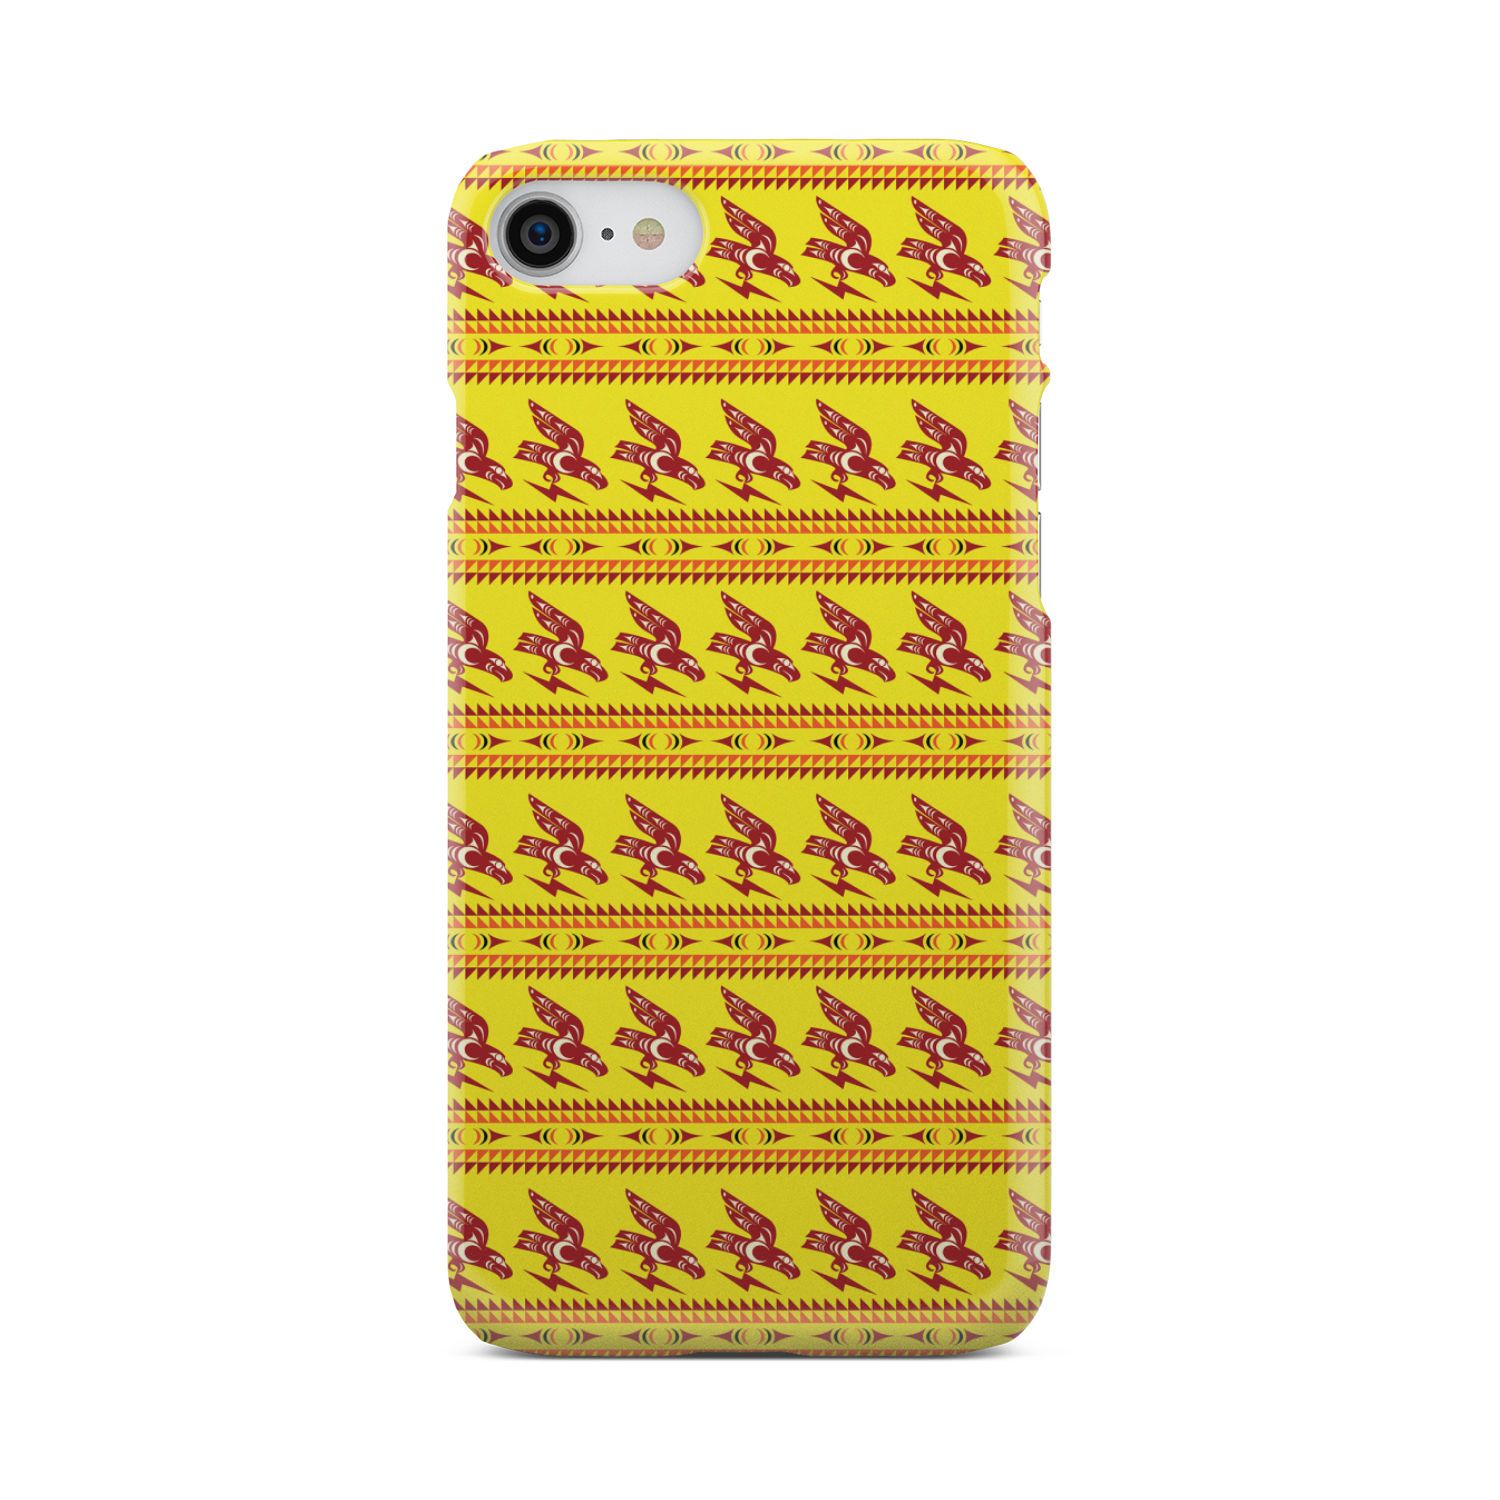 Ovila Mailhot Design : Eagle Brings Good Vibes Yellow Phone Case Phone Case wc-fulfillment iPhone 7 